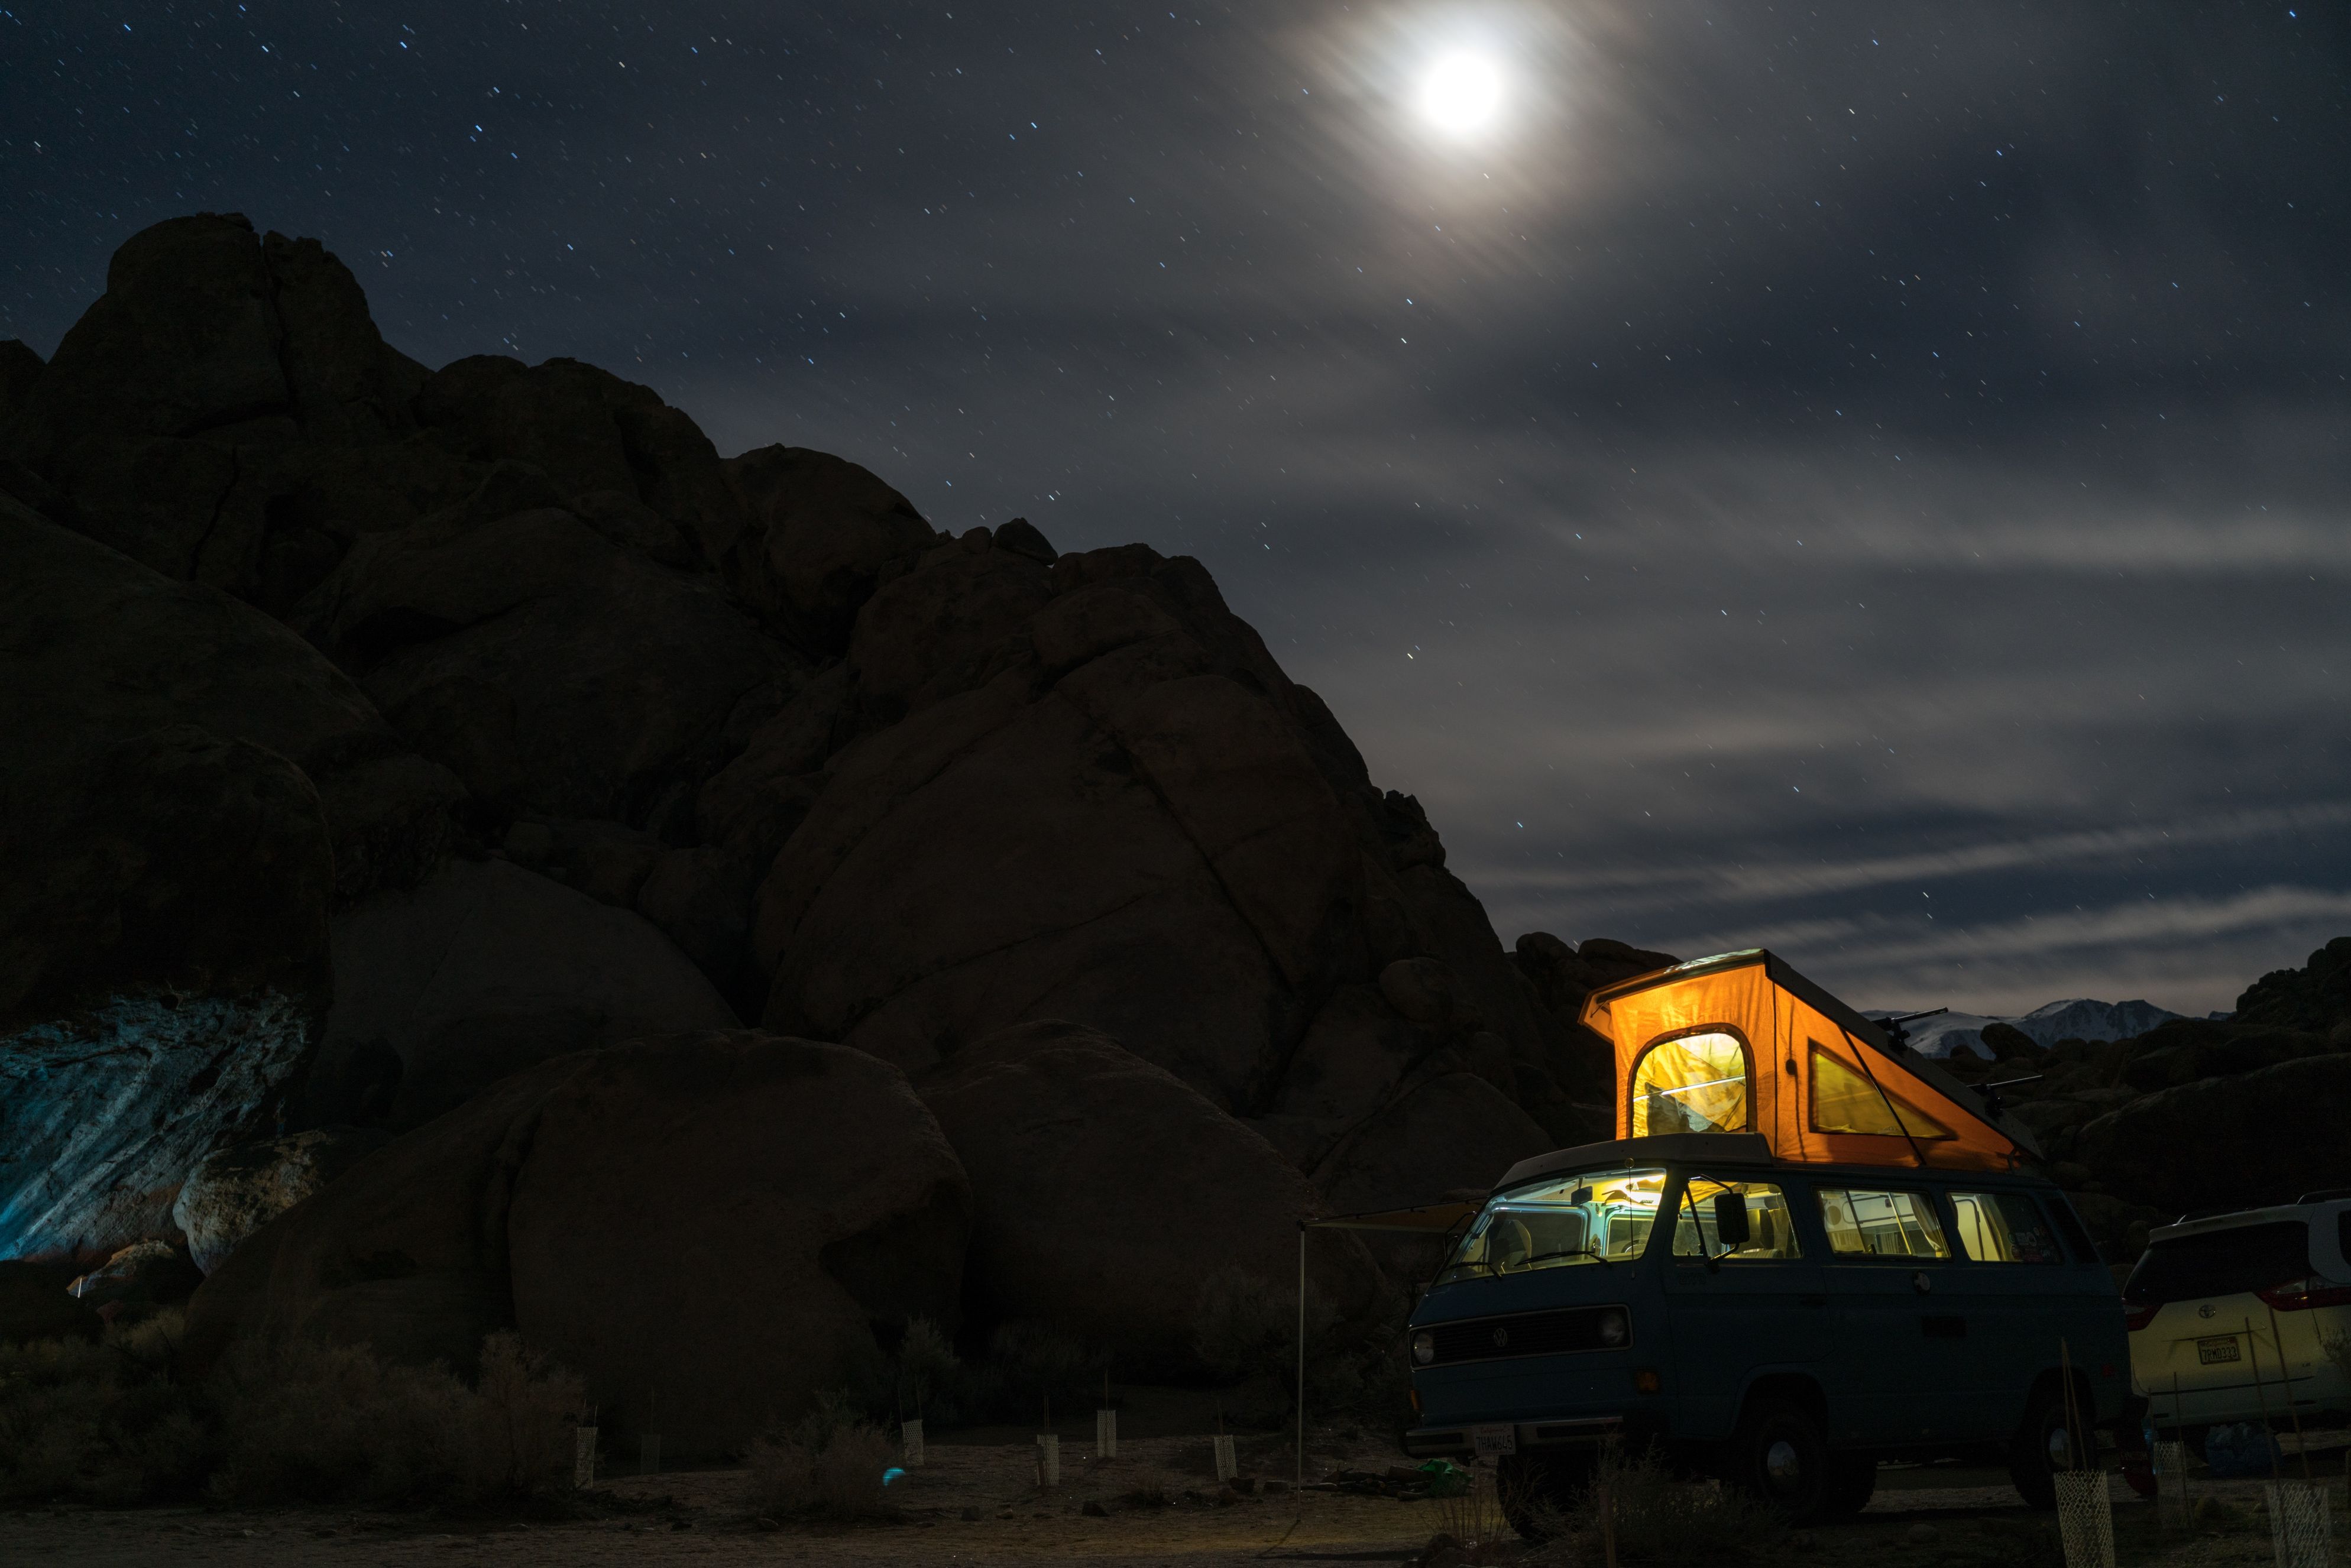 A camper van with a tent pitched on the roof sits below a mountain at night